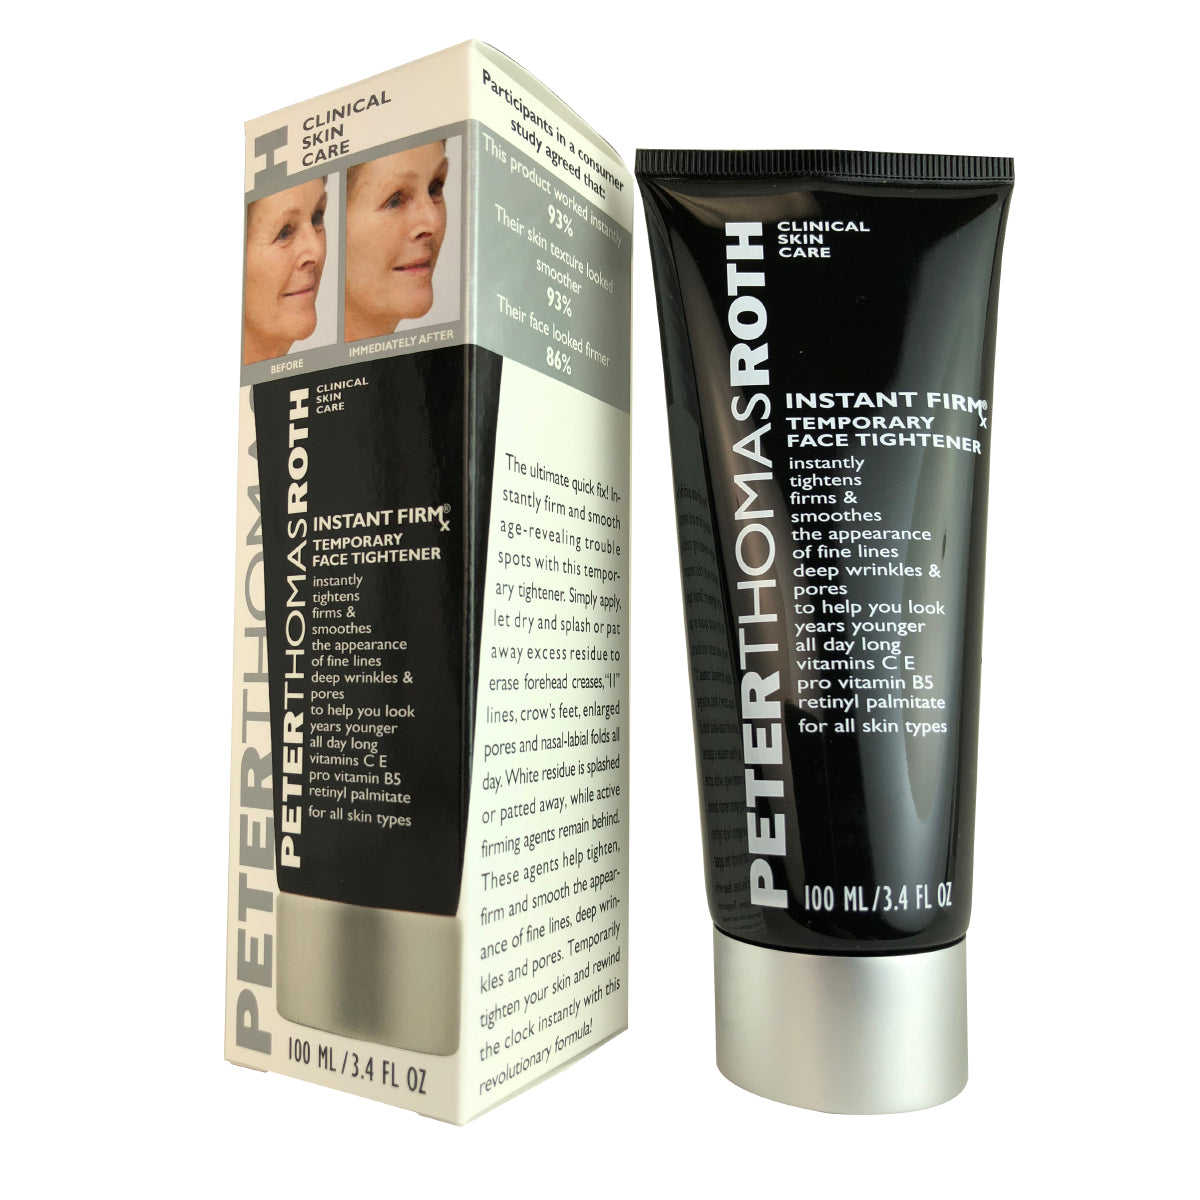 Peter Thomas Roth Instant FirmX 3.4 oz